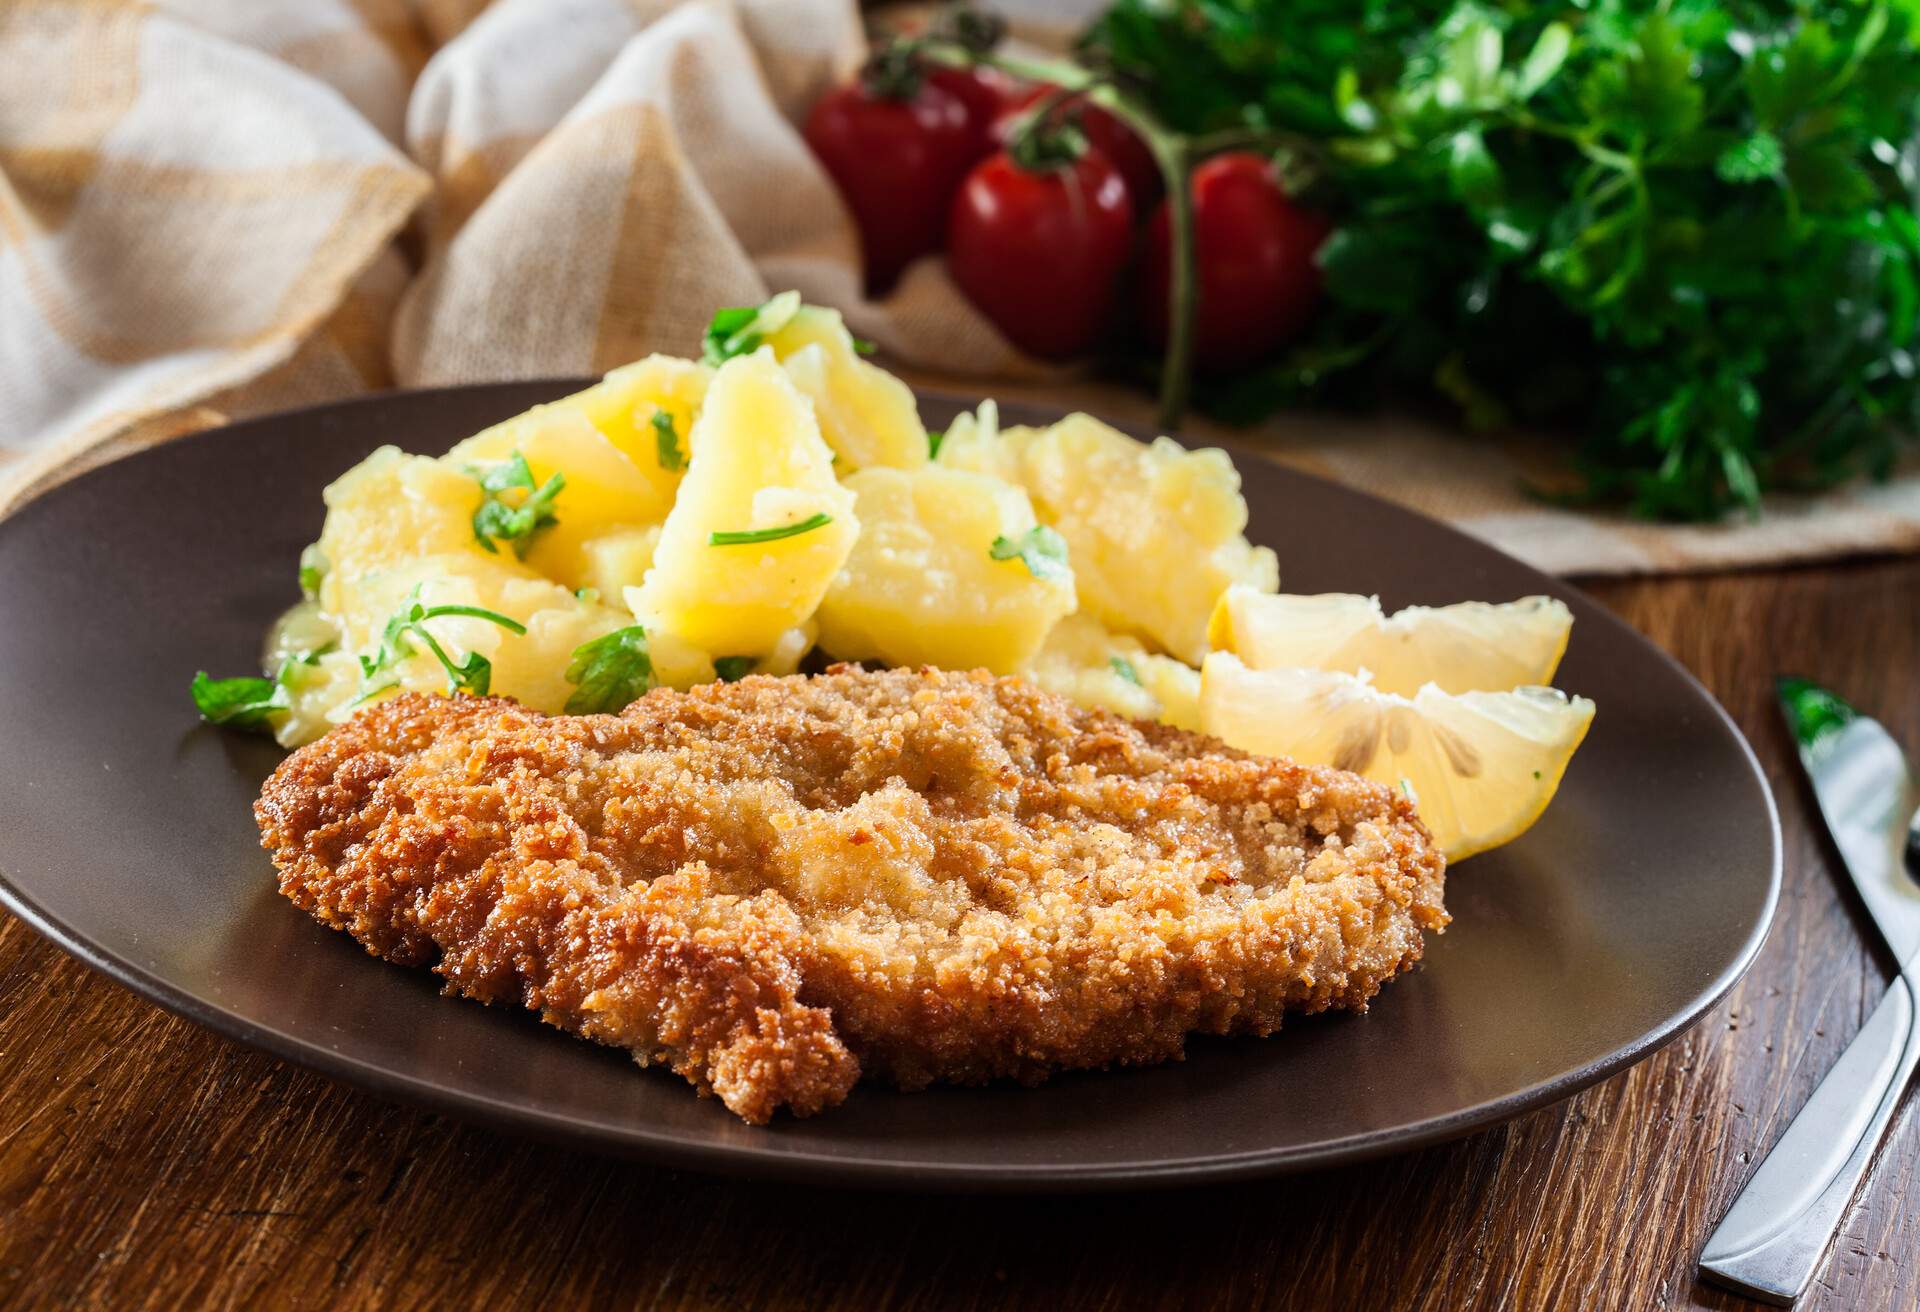 Homemade breaded viennese schnitzel with potato salad on a plate